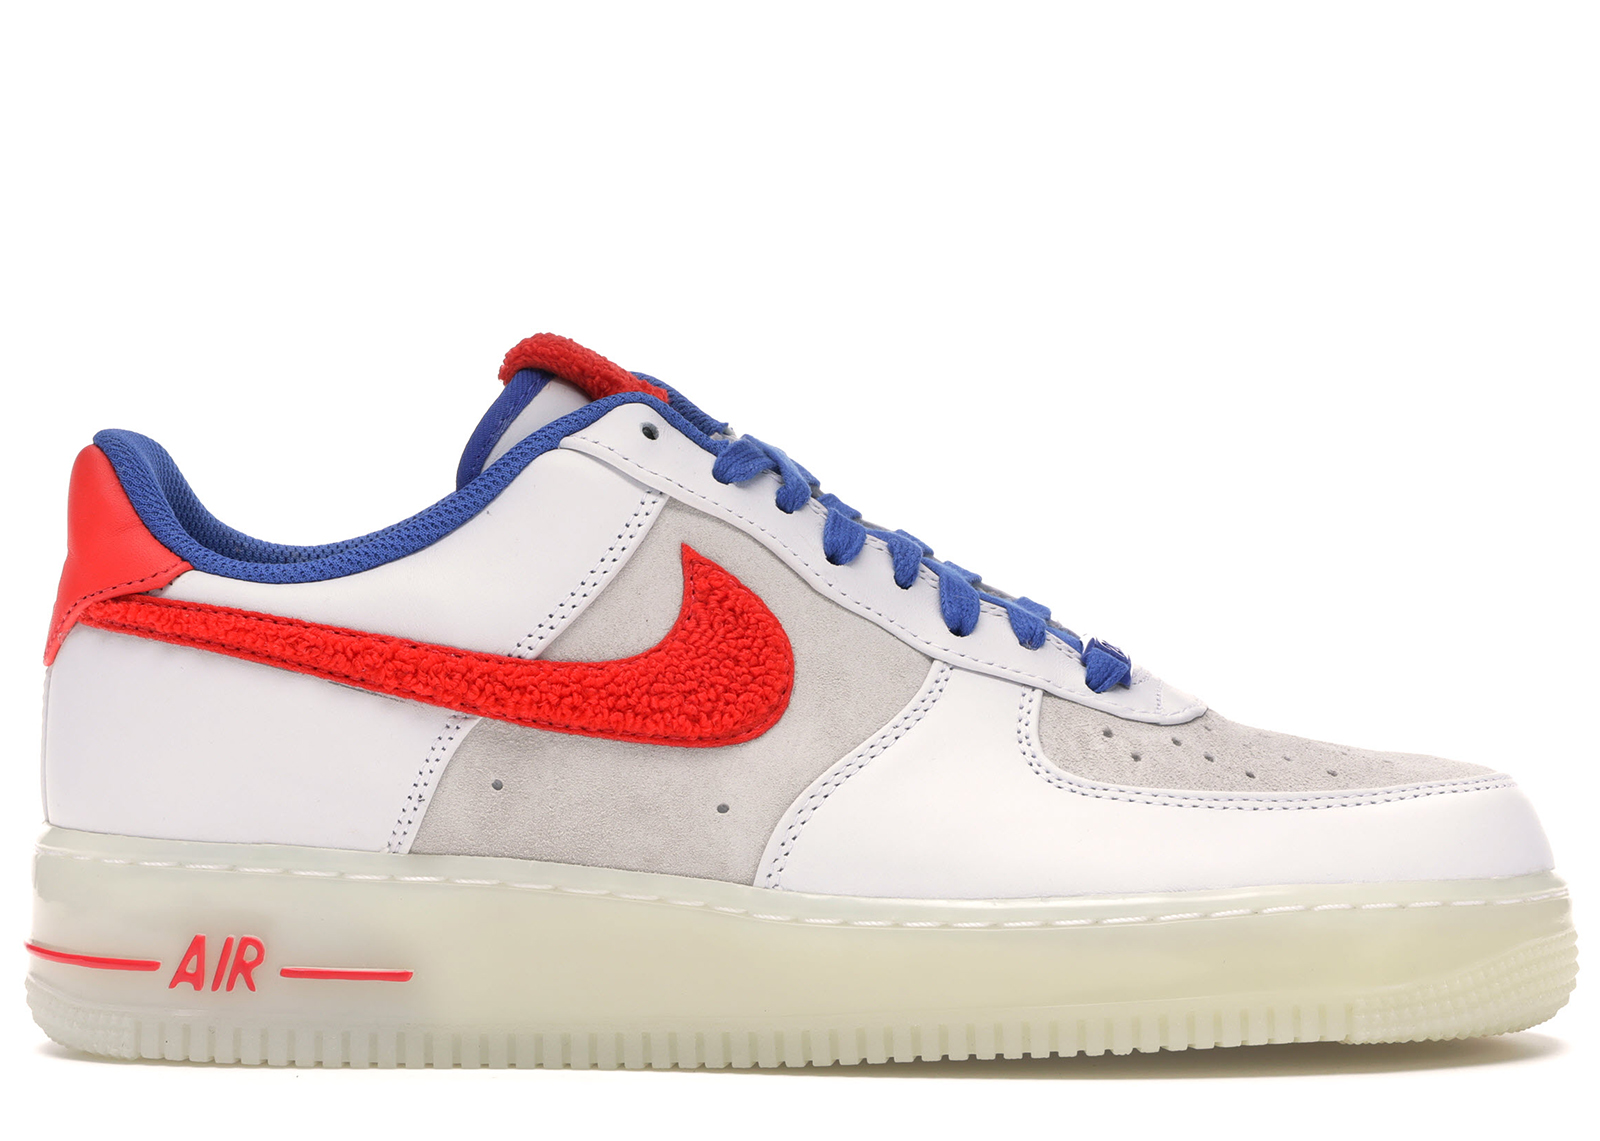 NIKE AIR FORCE 1 YEAR OF THE RABBIT